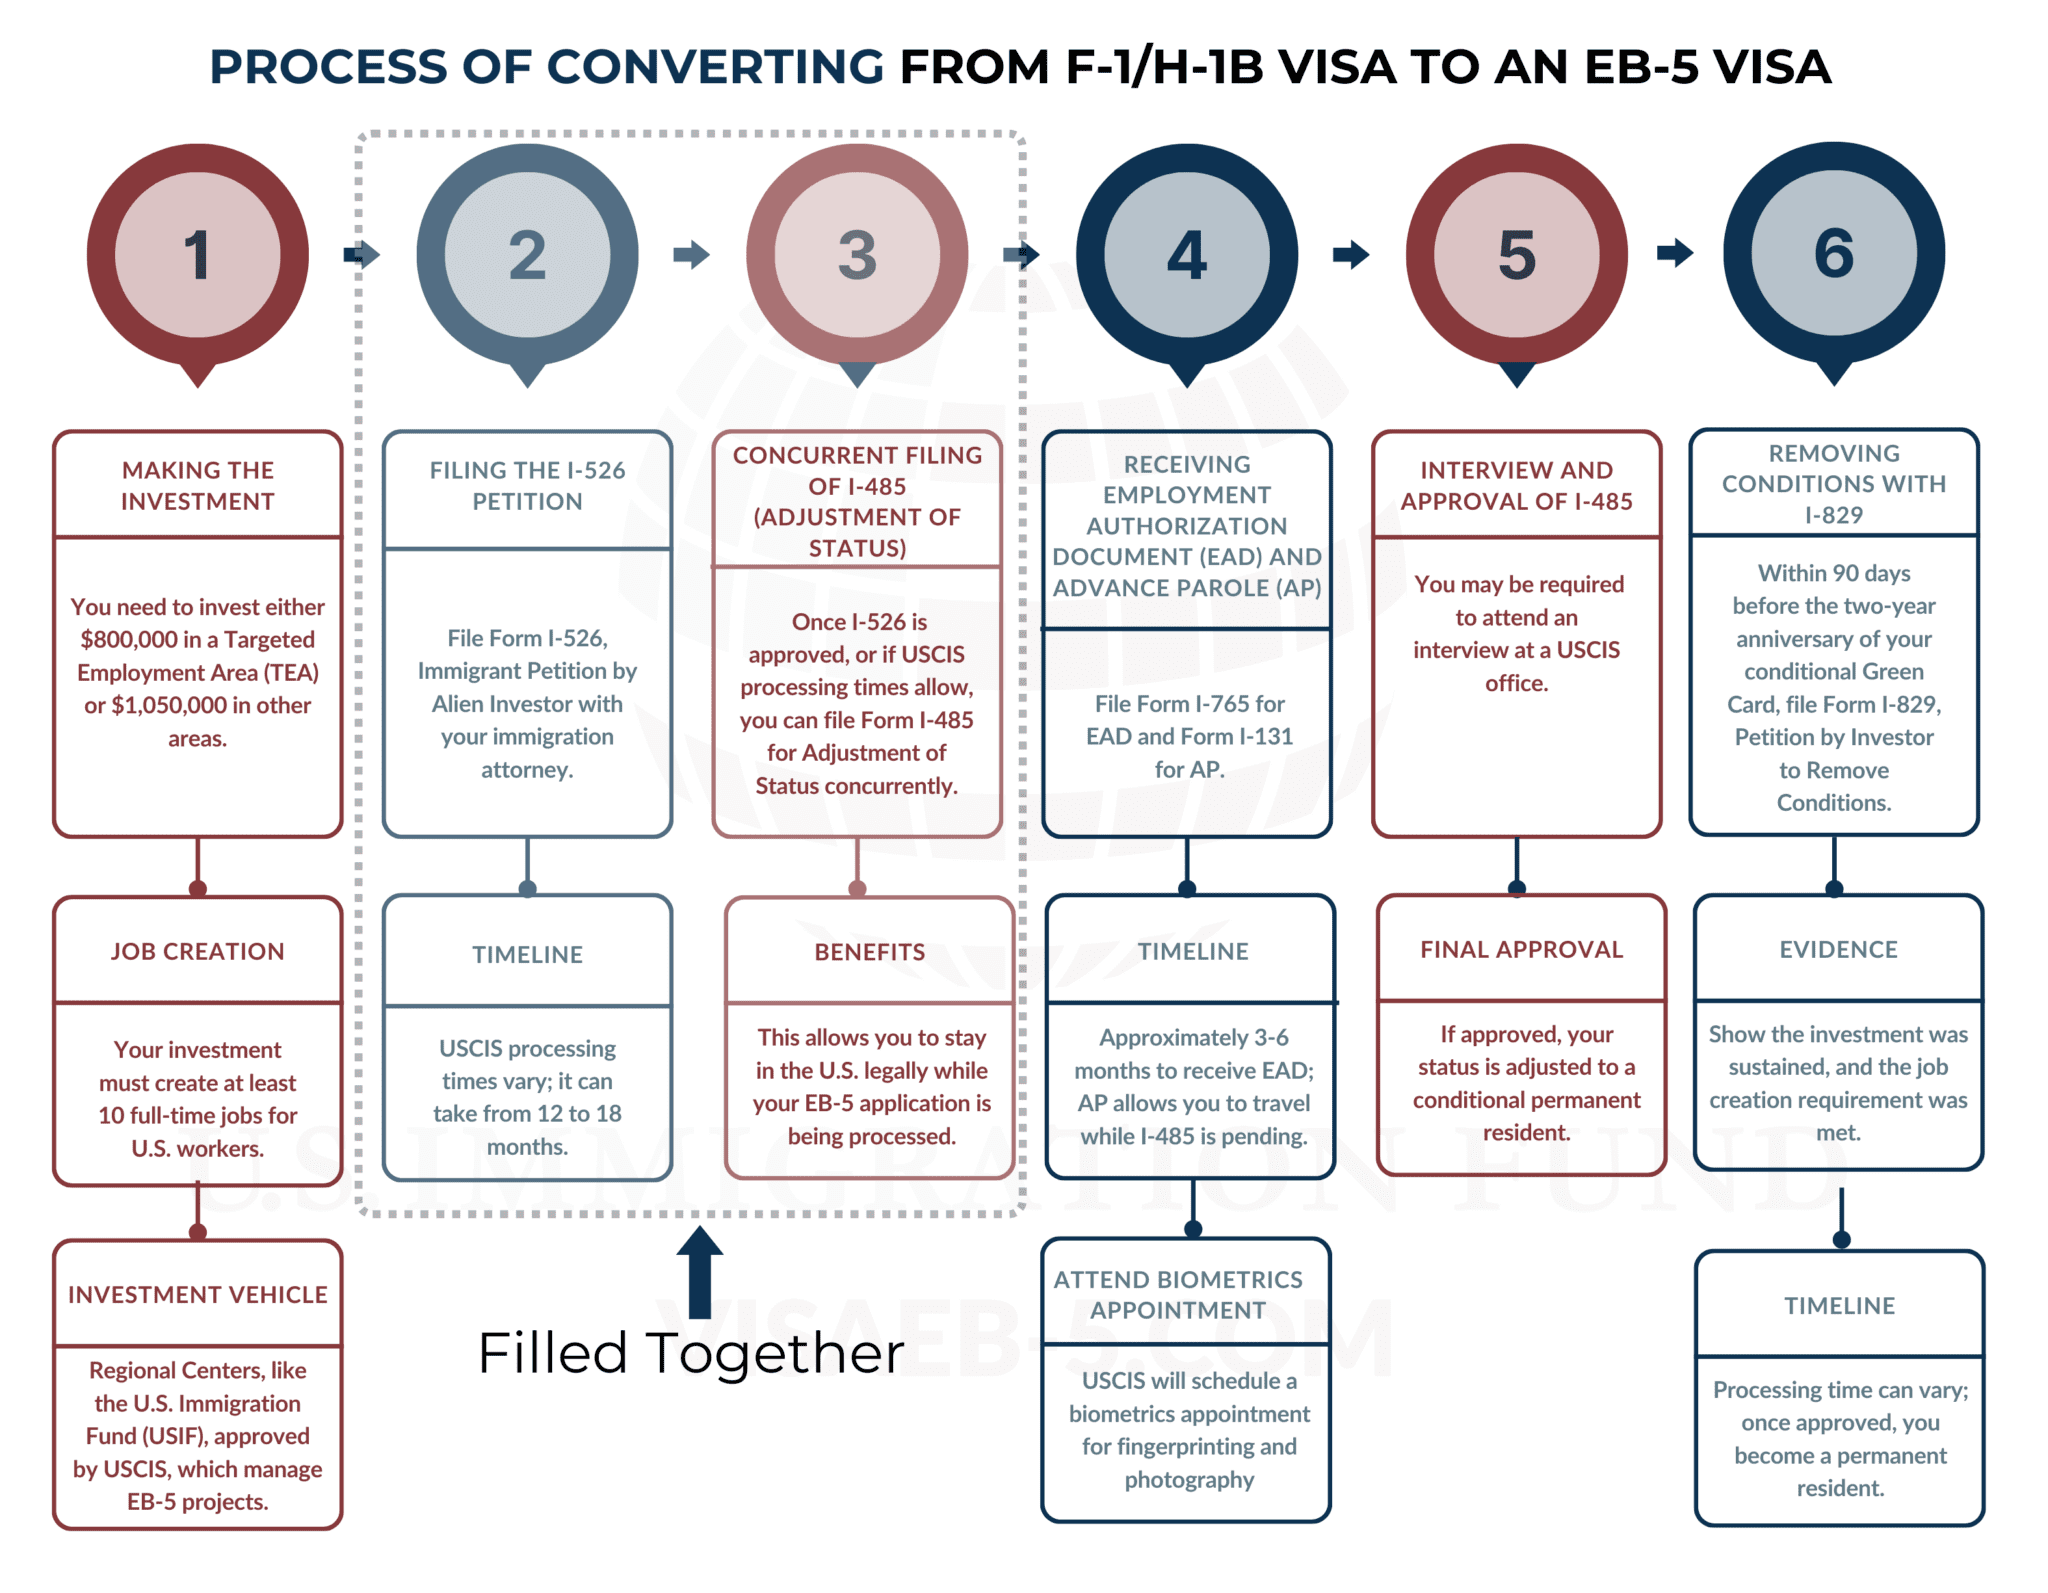 Infographic detailing the EB-5 visa application process, from initial investment through obtaining permanent U.S. residency.